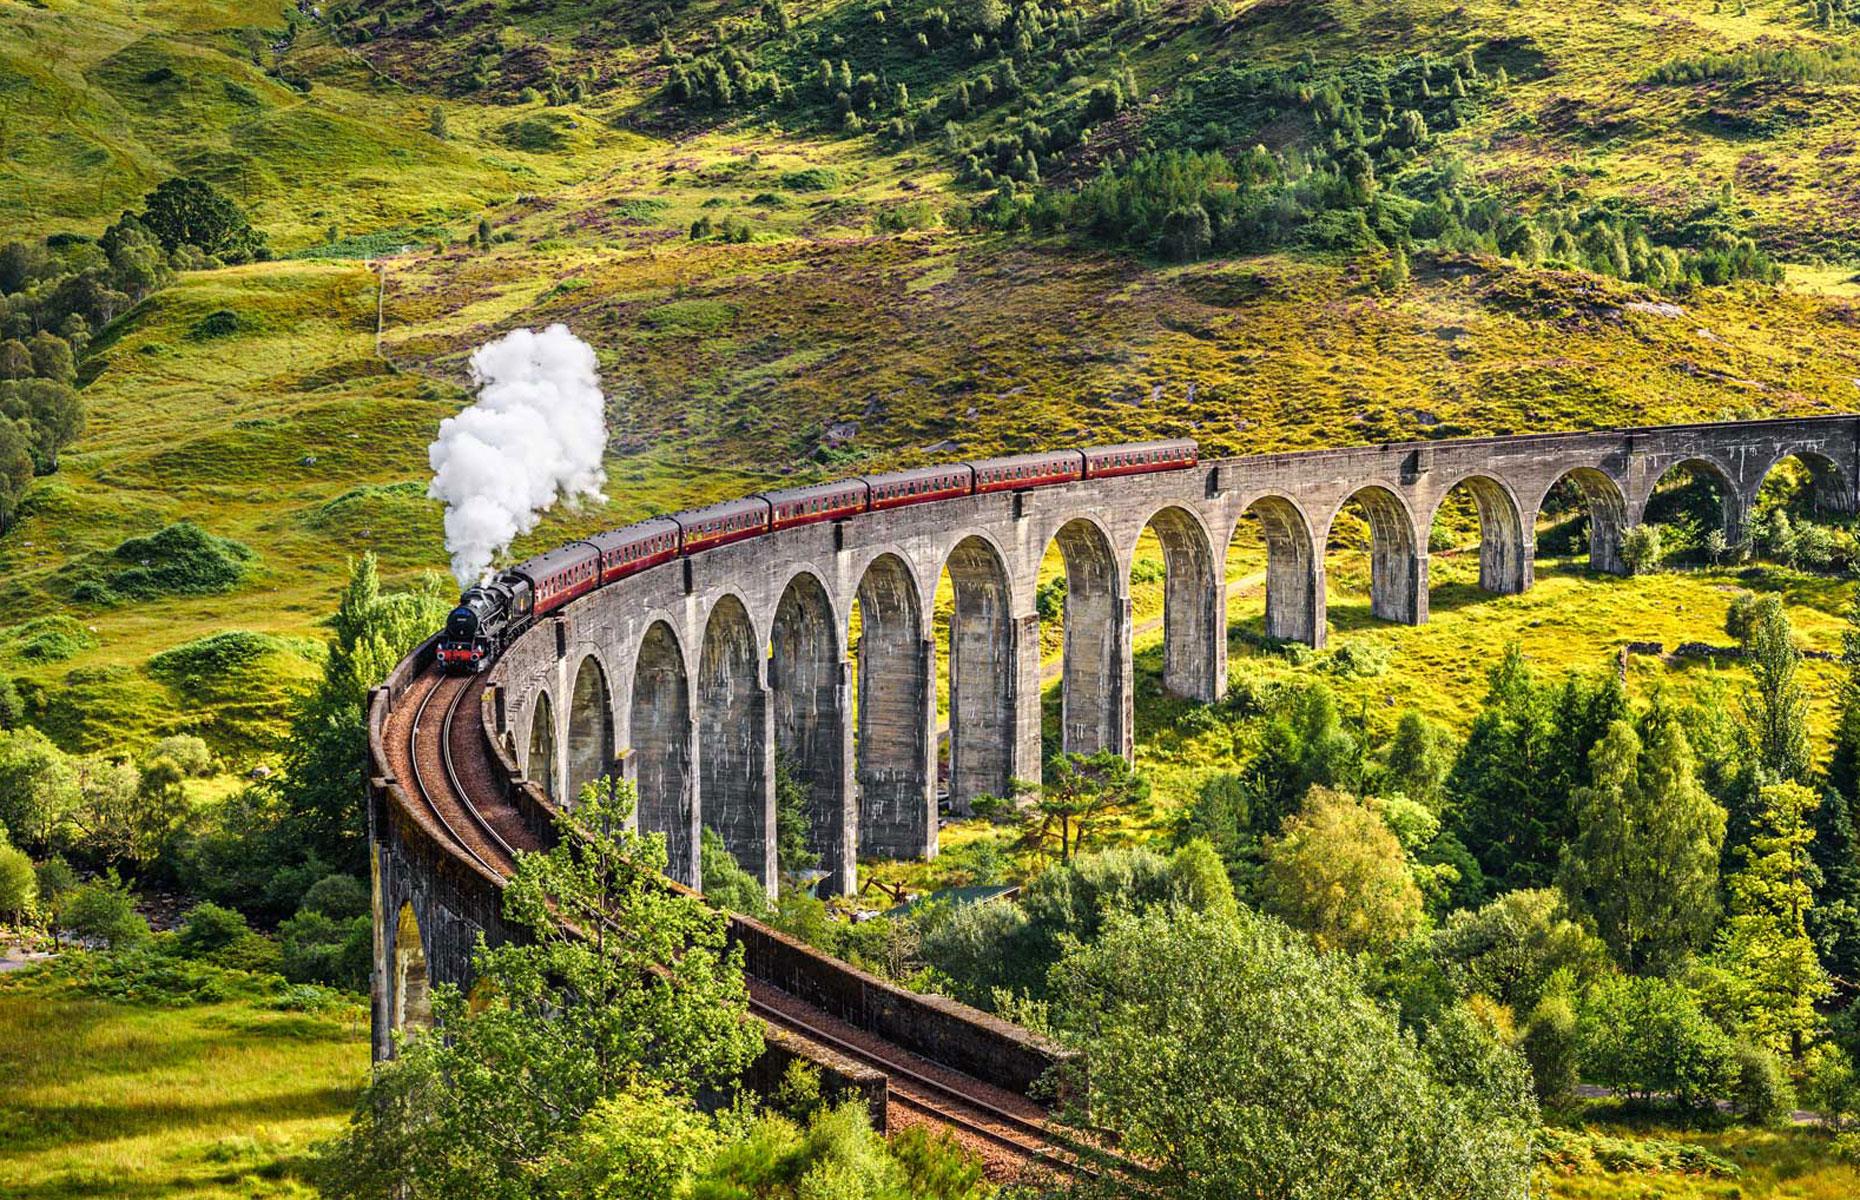 <p>For high-net-worth individuals who want to take their love of rail travel to the next level, there's an even more tempting option: chartering an entire luxury train.</p>  <p>Again, most high-end trains can be chartered, with prices typically starting from around $47,000 (£33,316k) per day, according to the Luxury Train Club and Train Chartering. But that's the bare minimum, and the cost of chartering the very best trains likely reaches hundreds of thousands of dollars daily.</p>